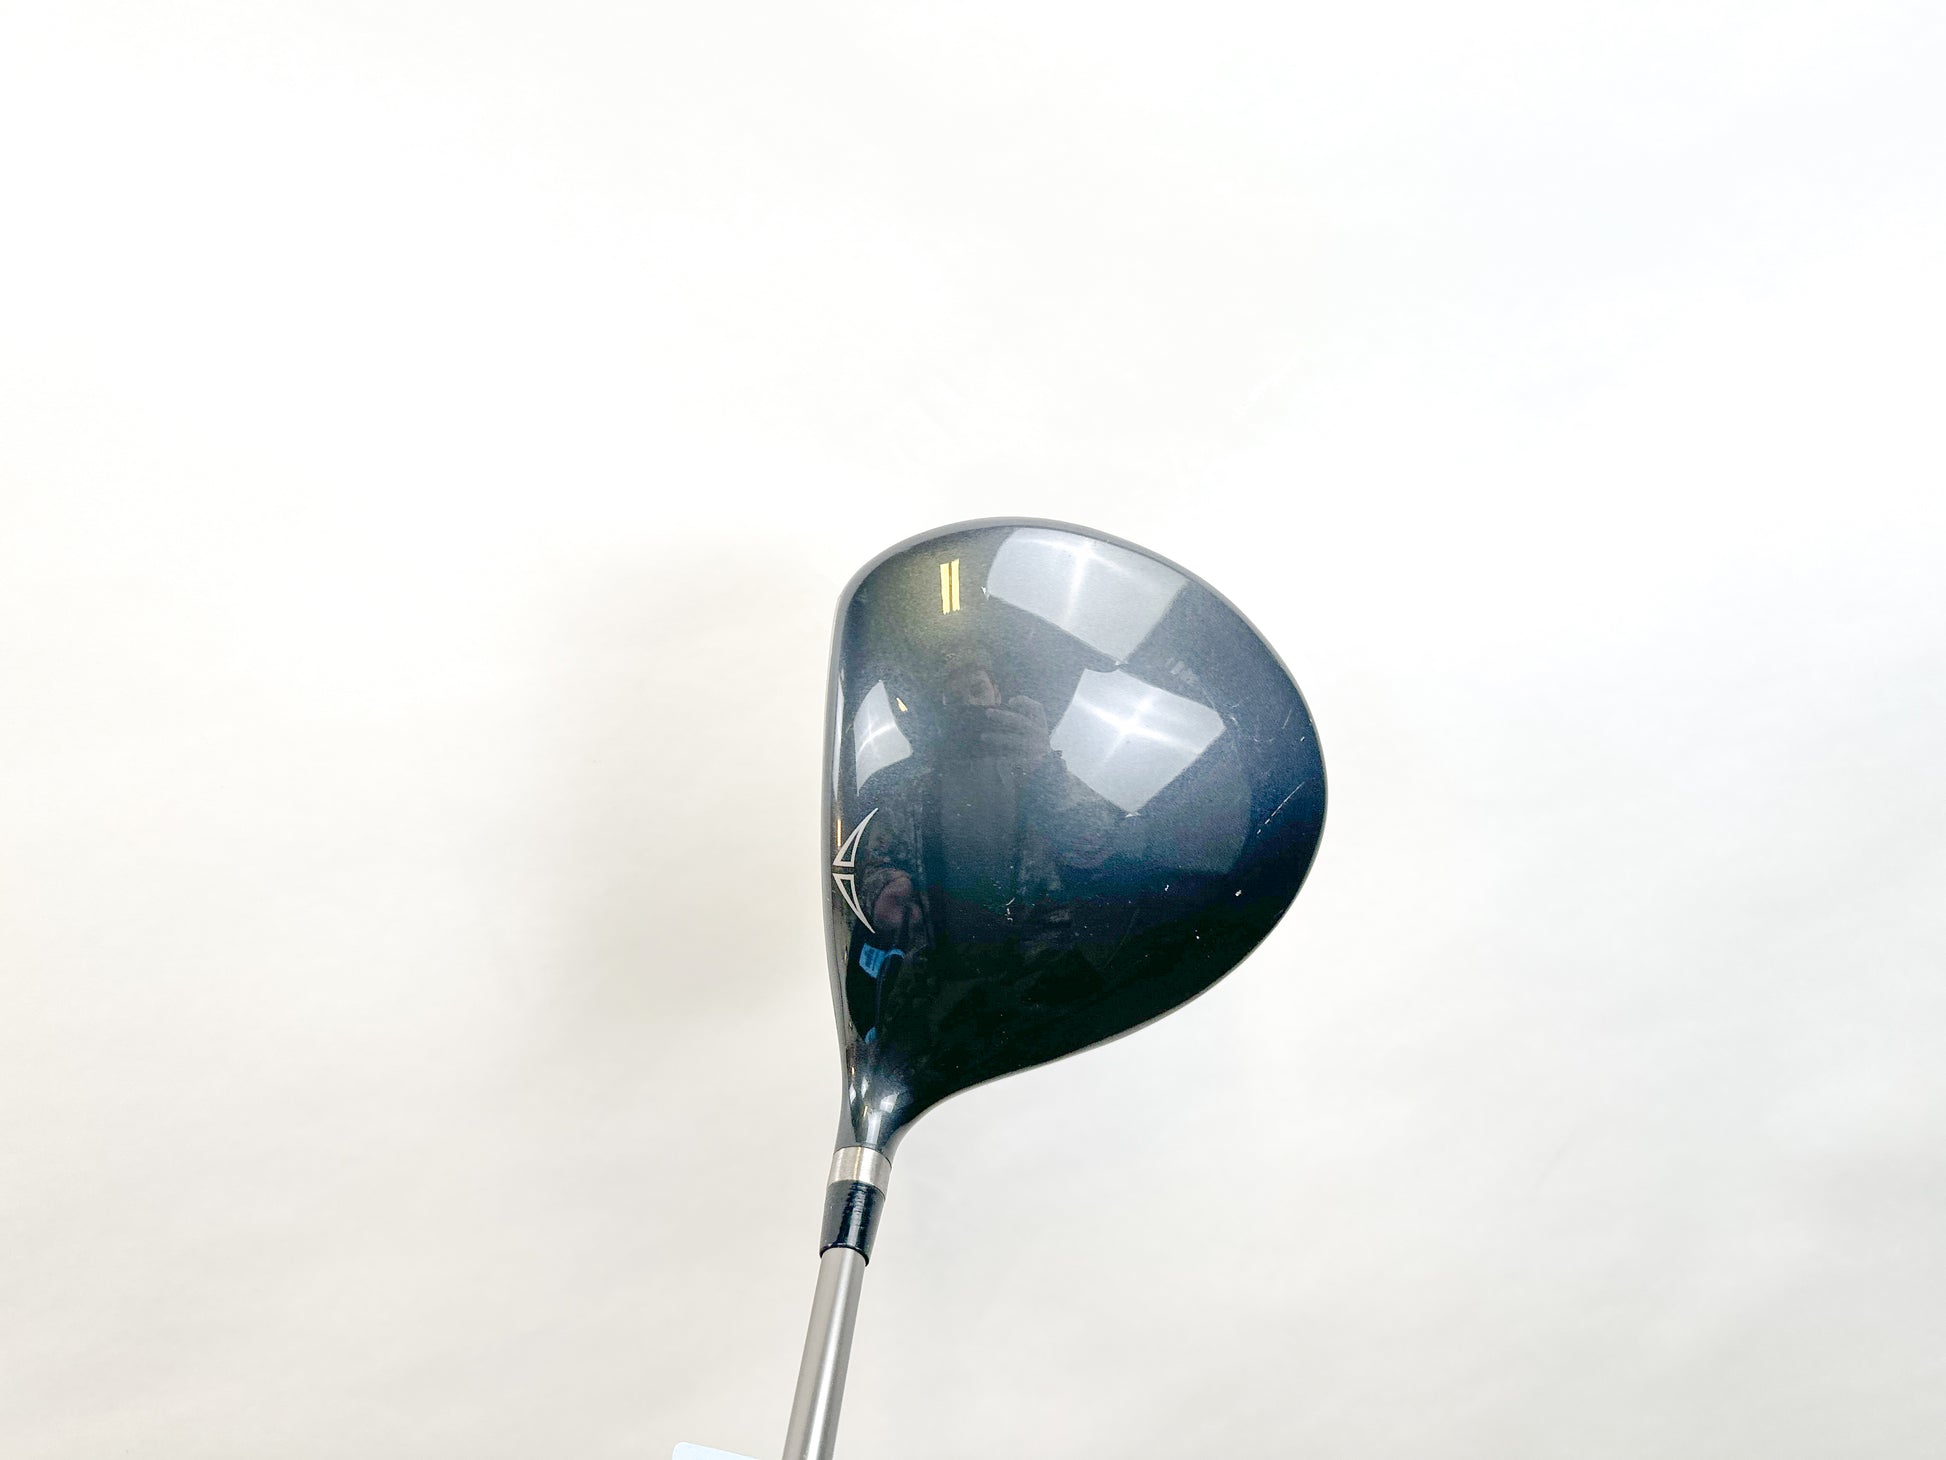 Used Ping G20 Driver - Right-Handed - 9.5 Degrees - Stiff Flex-Next Round